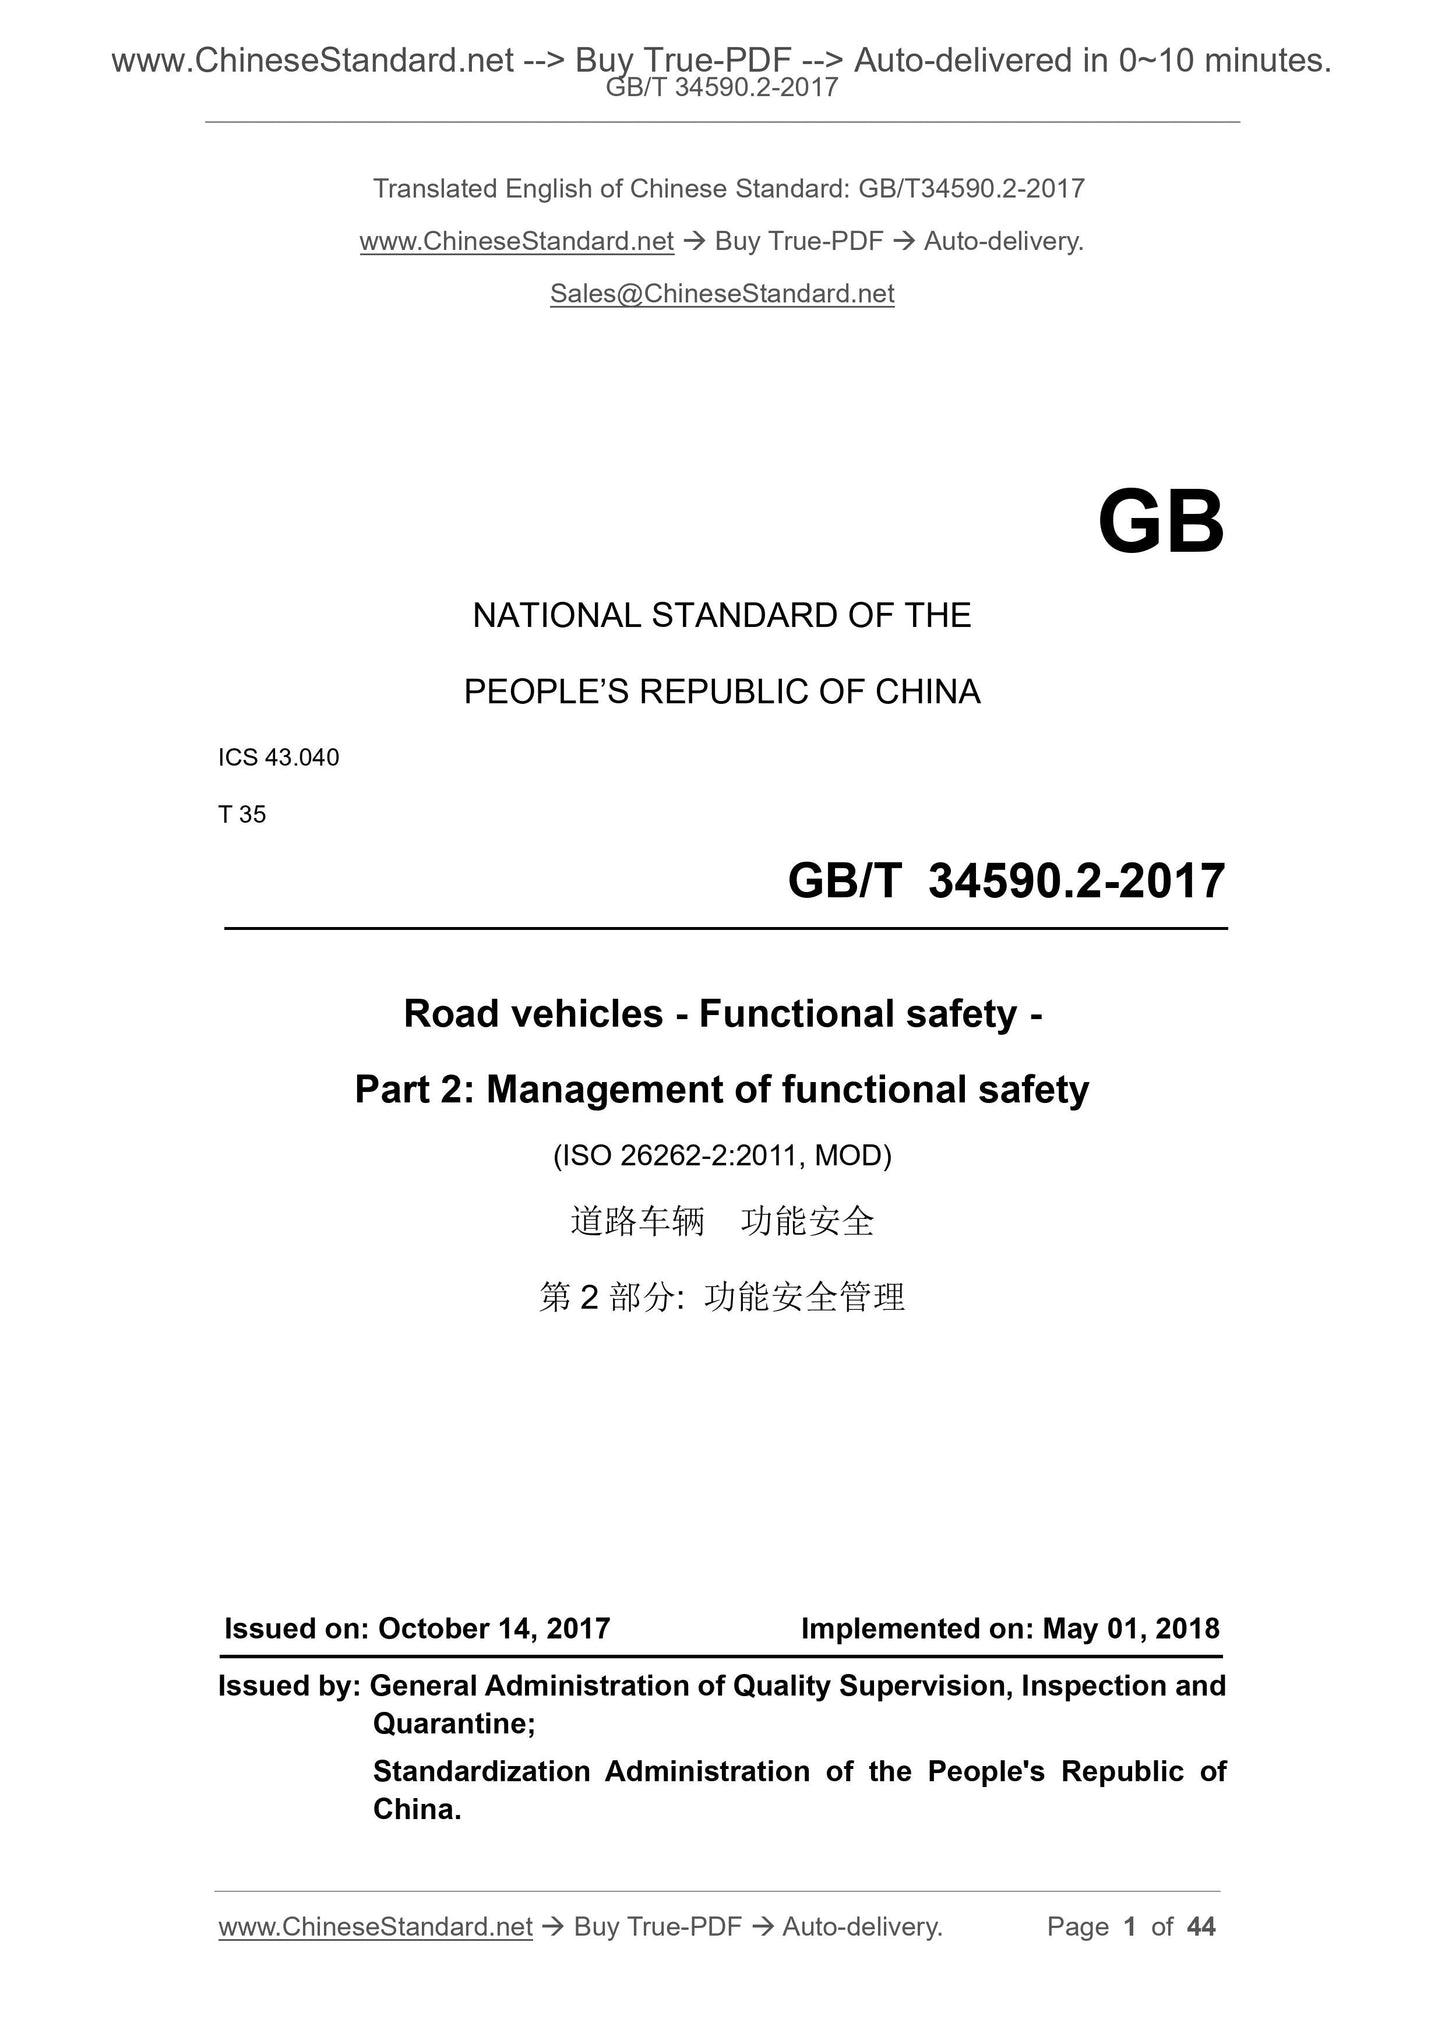 GB/T 34590.2-2017 Page 1